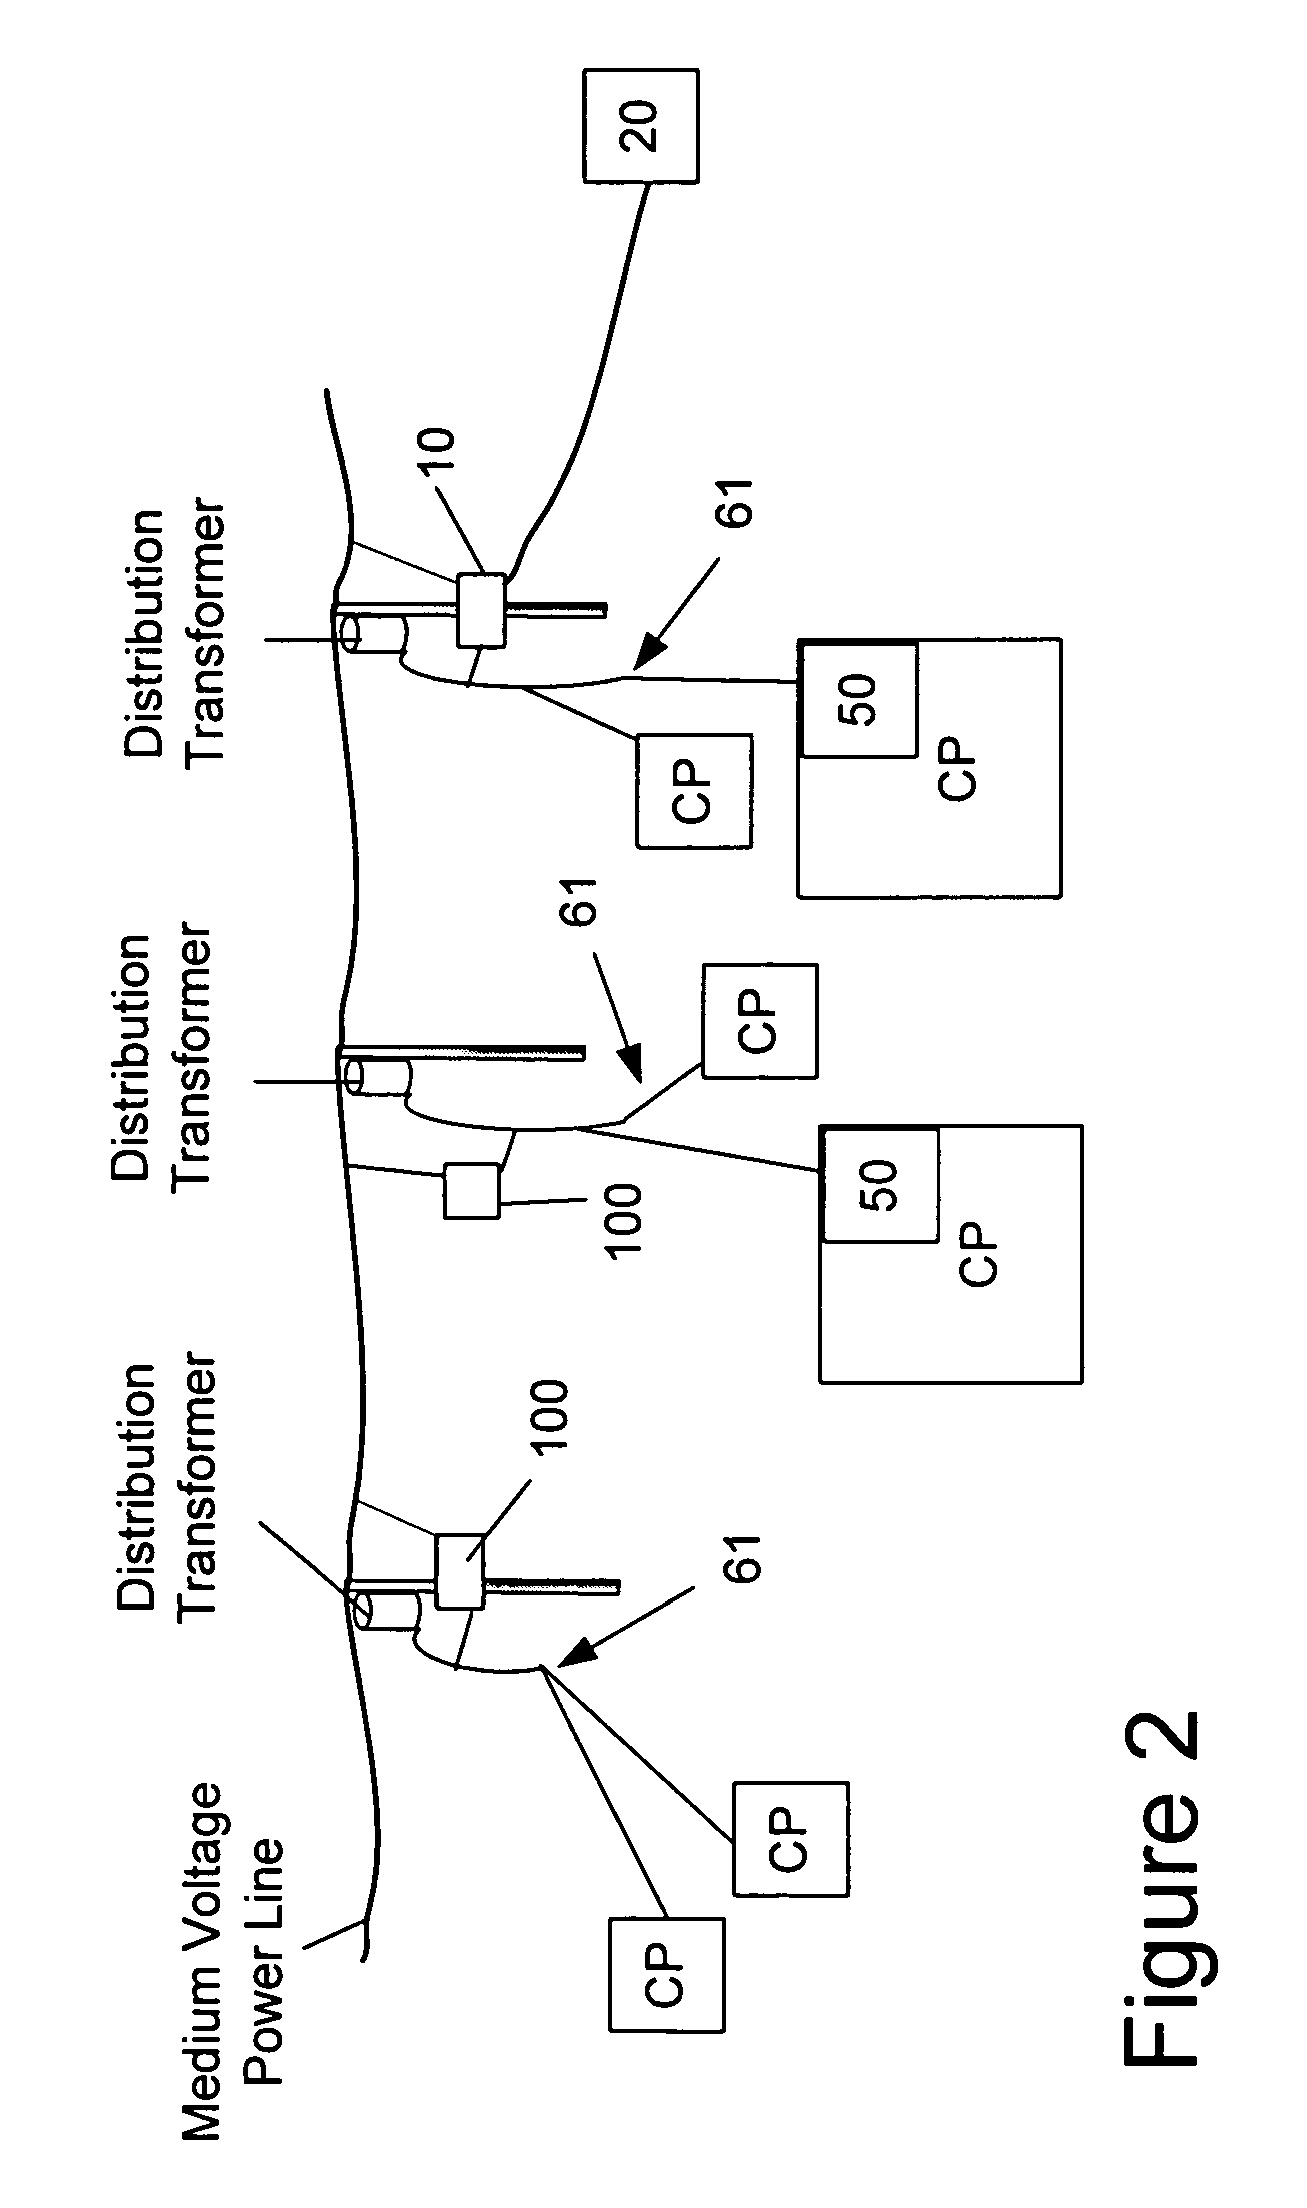 Power line communications device and method